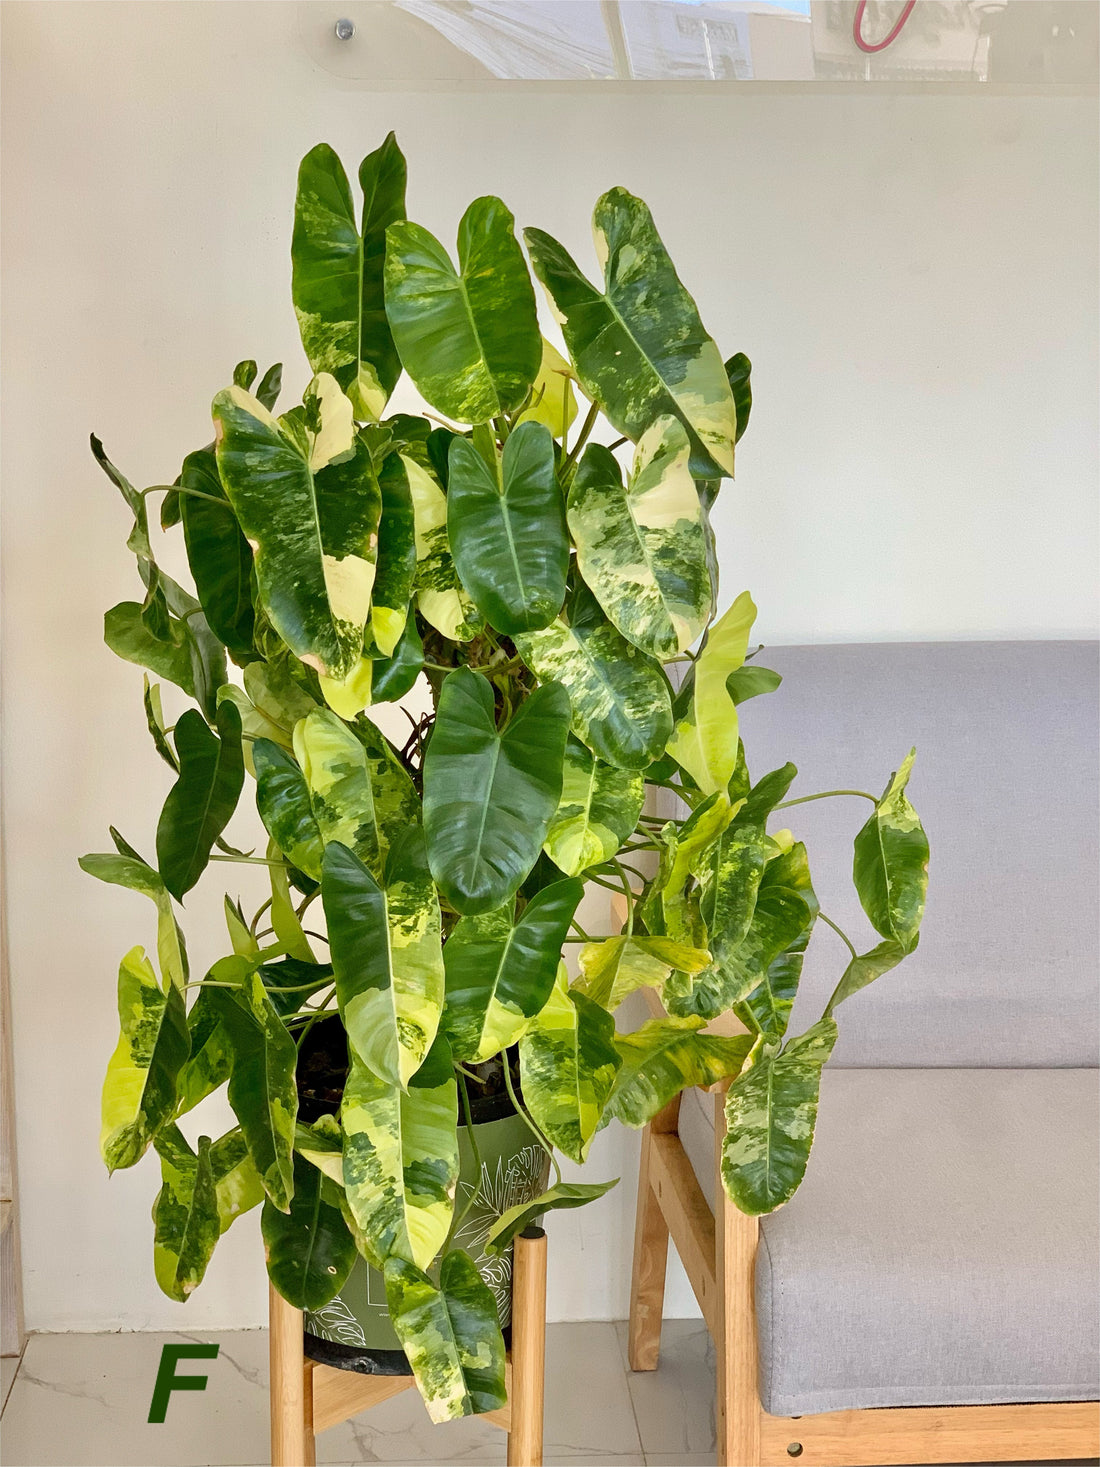 How can I make money by growing Philodendron Burle Marxx variegated?